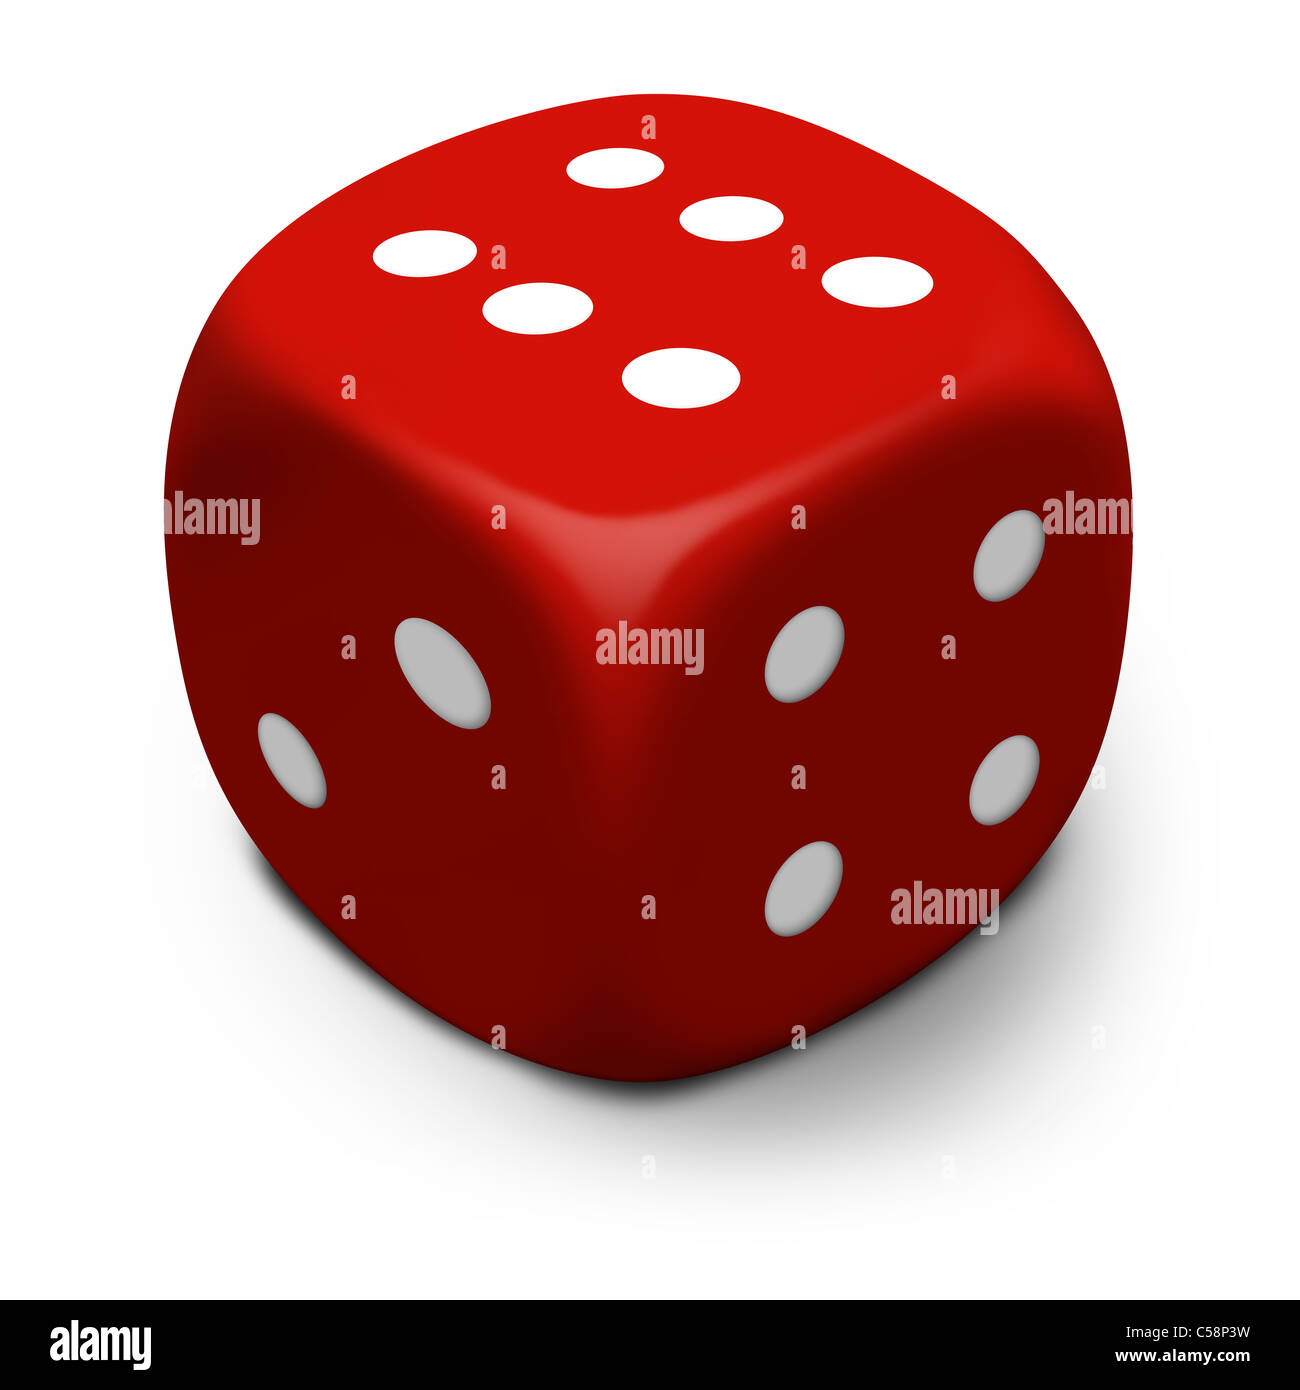 Modern 3D red dice/die that rolled a six, isolated on a white background with shadow. Stock Photo